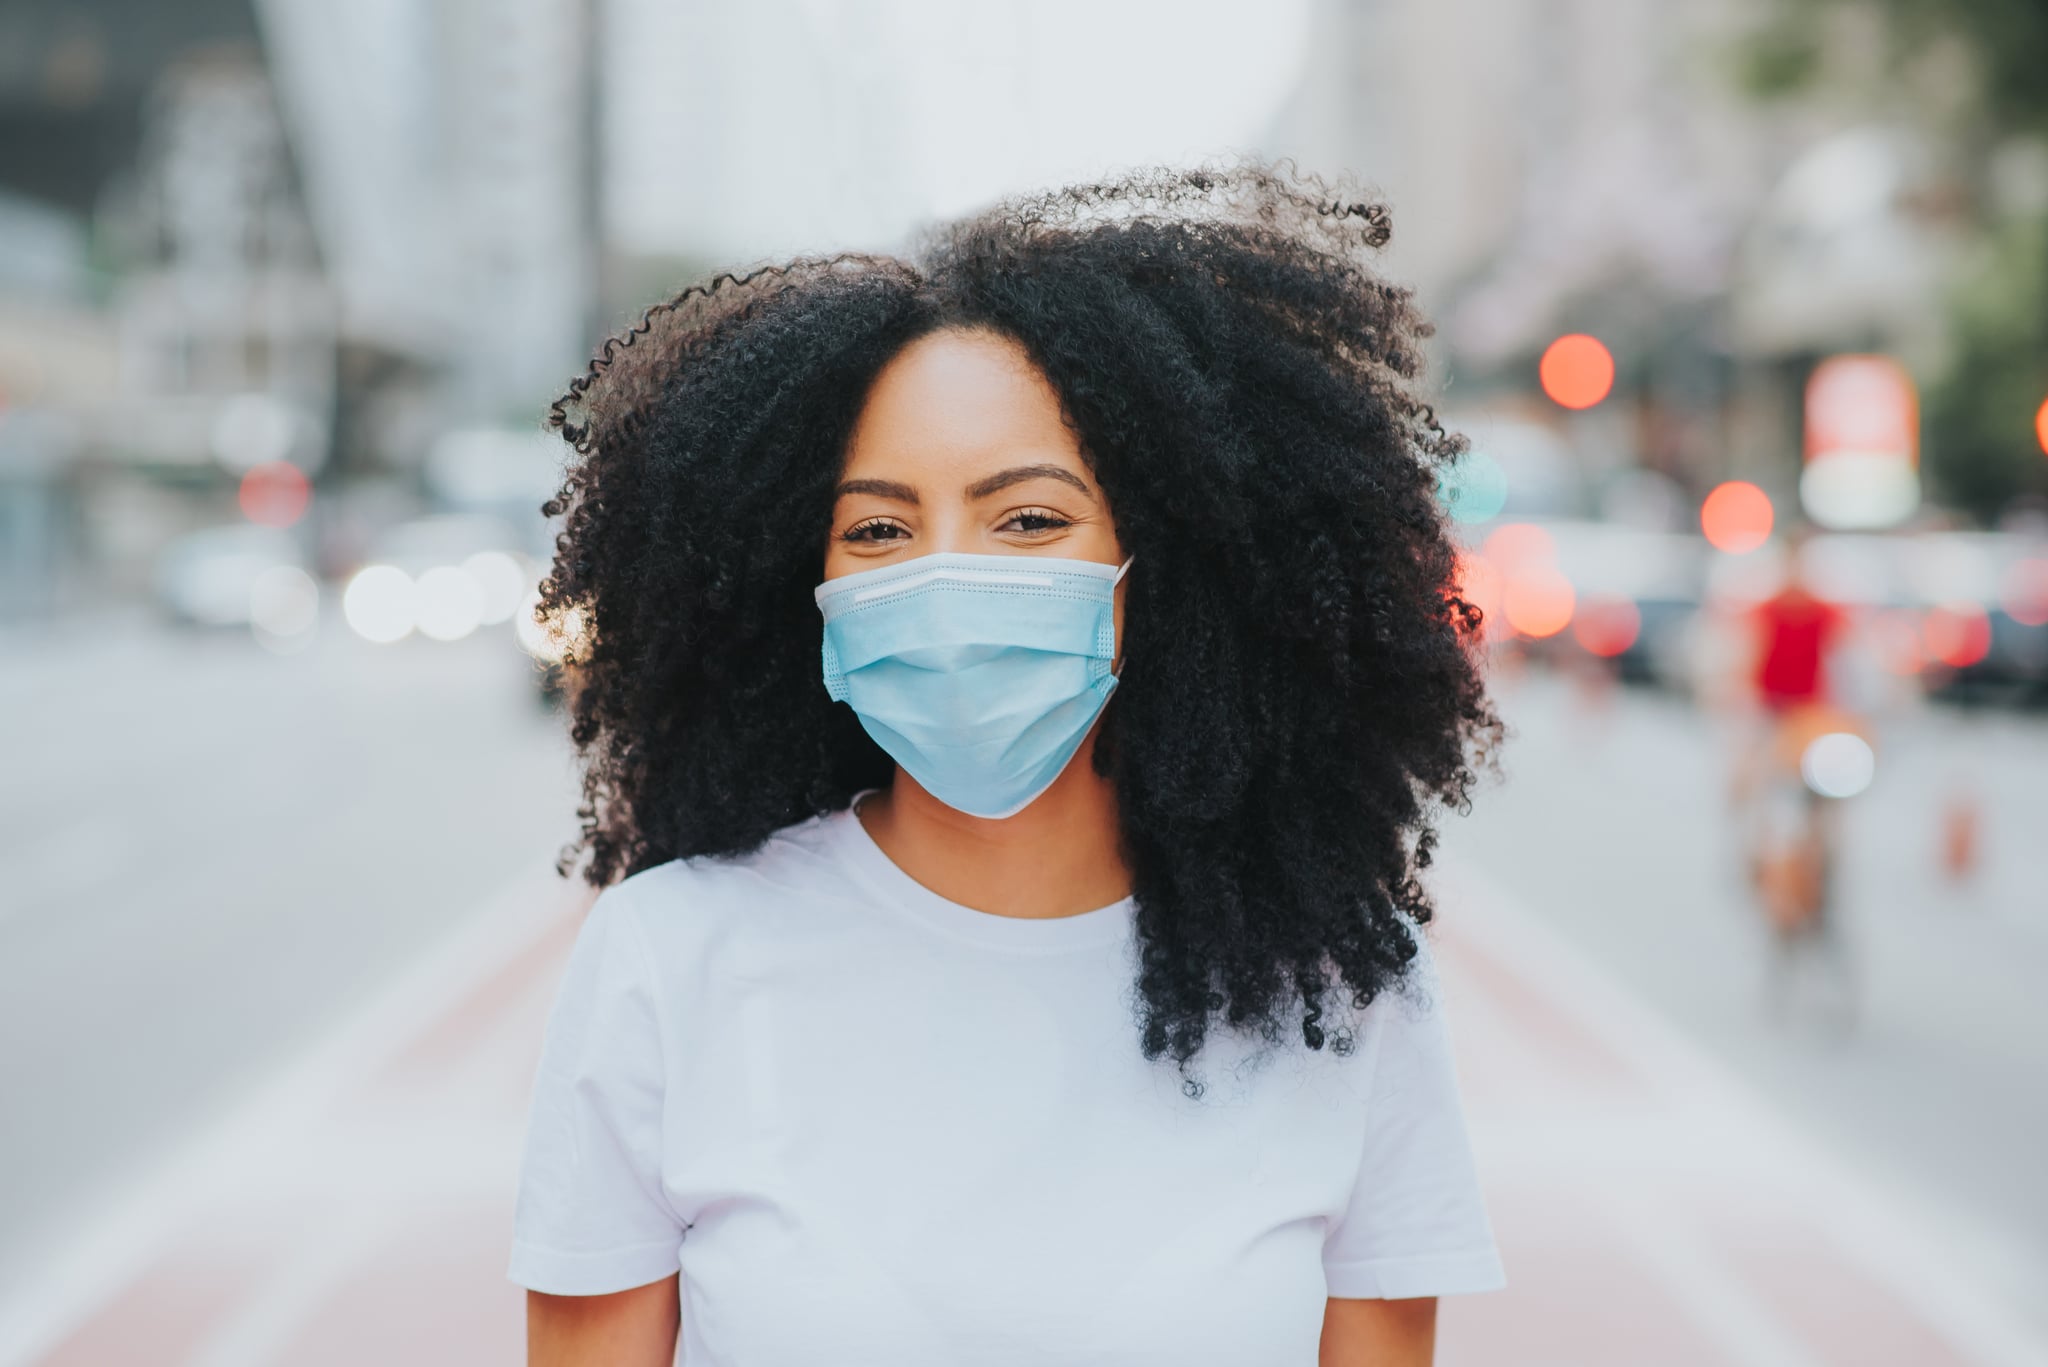 Young woman in the city smiling behind the coronavirus face protection mask